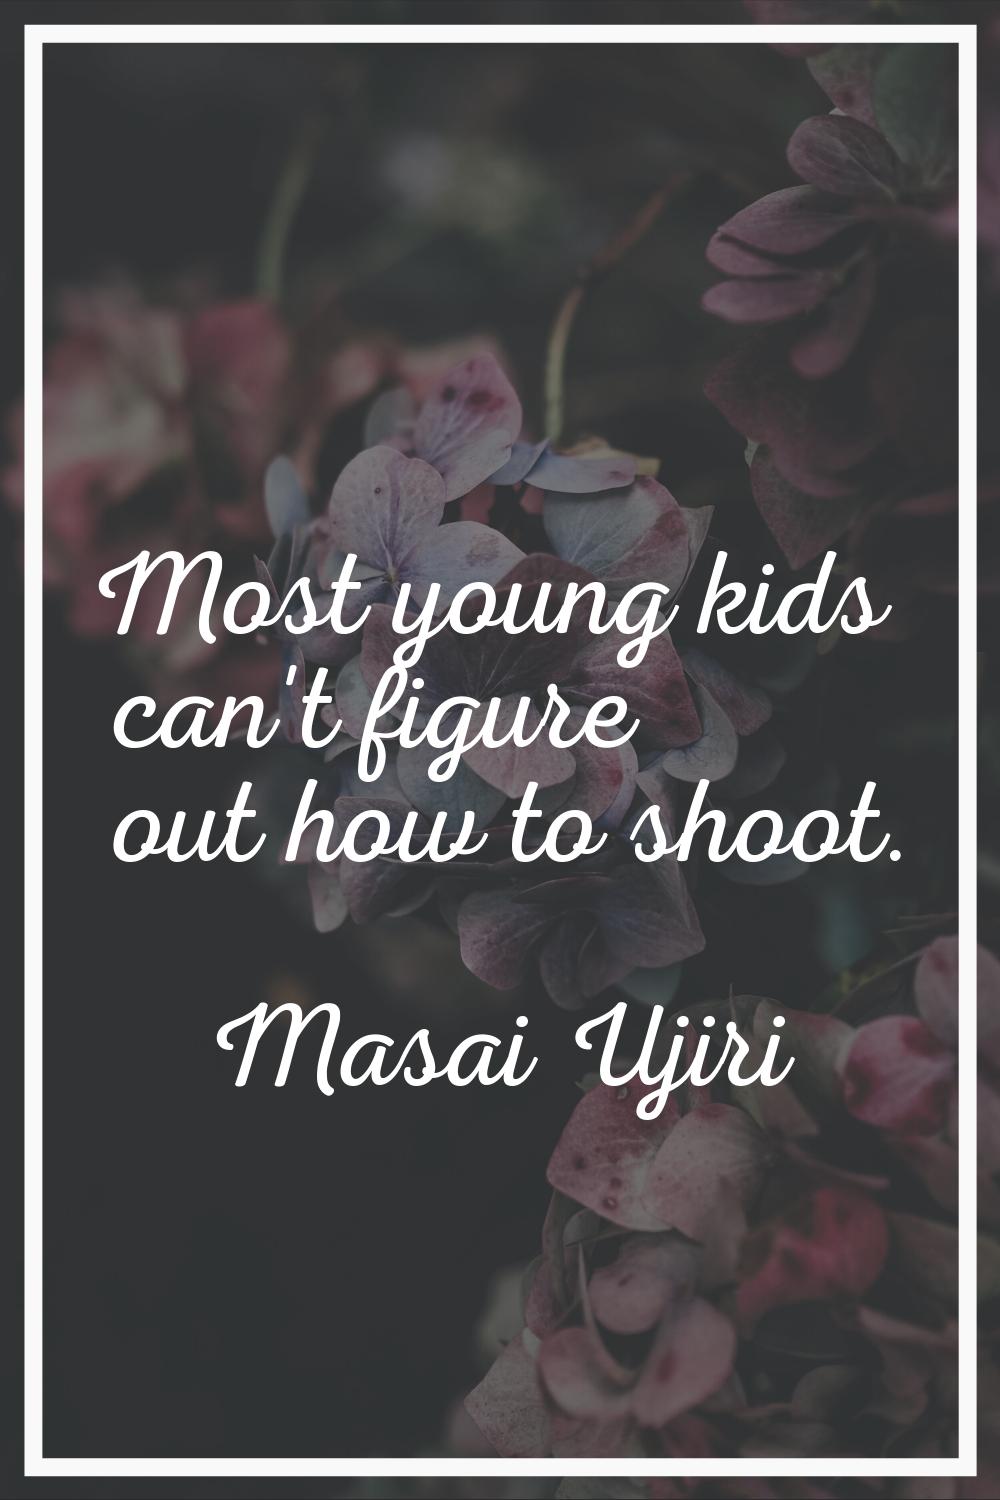 Most young kids can't figure out how to shoot.